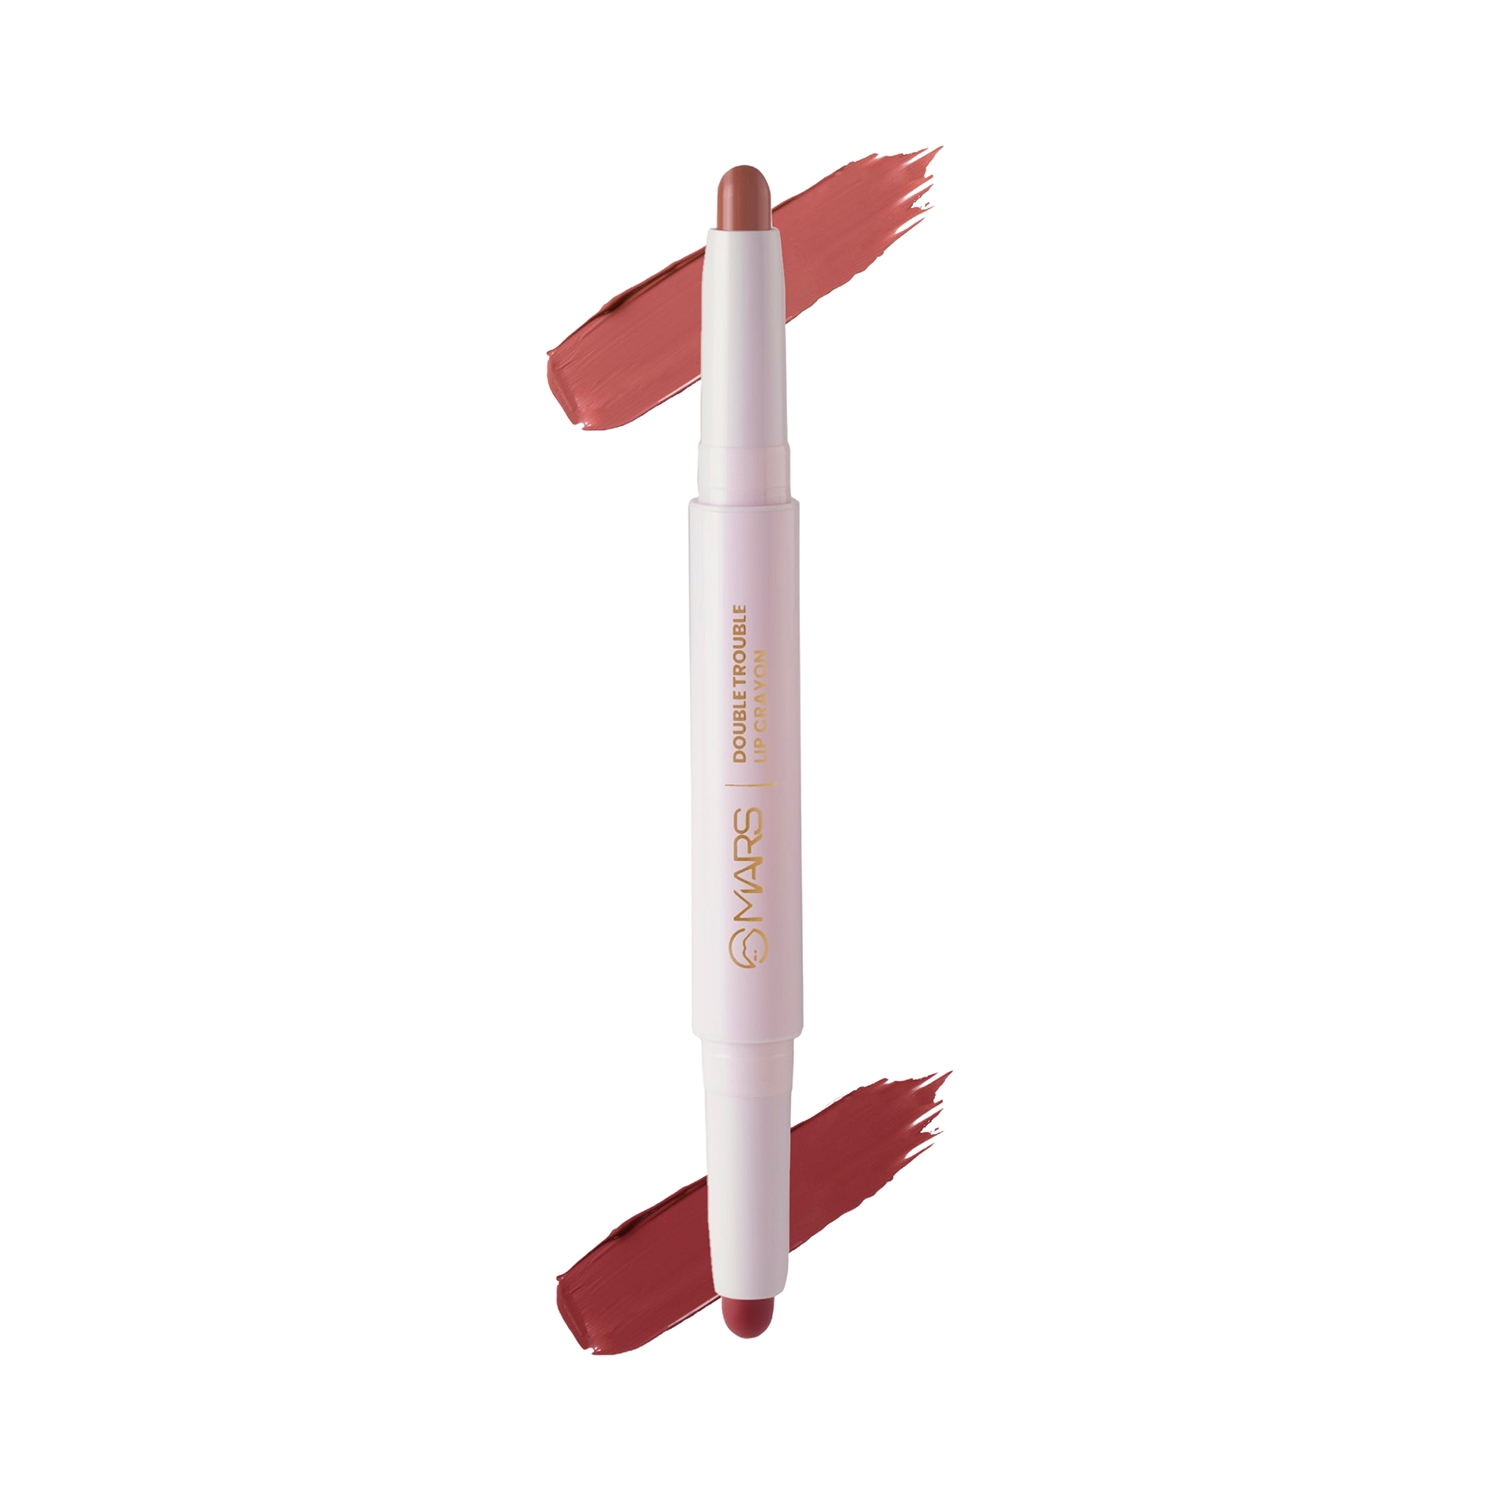 MARS | MARS Double Trouble Lip Crayon - 06 Bronzed Ruby (4g)